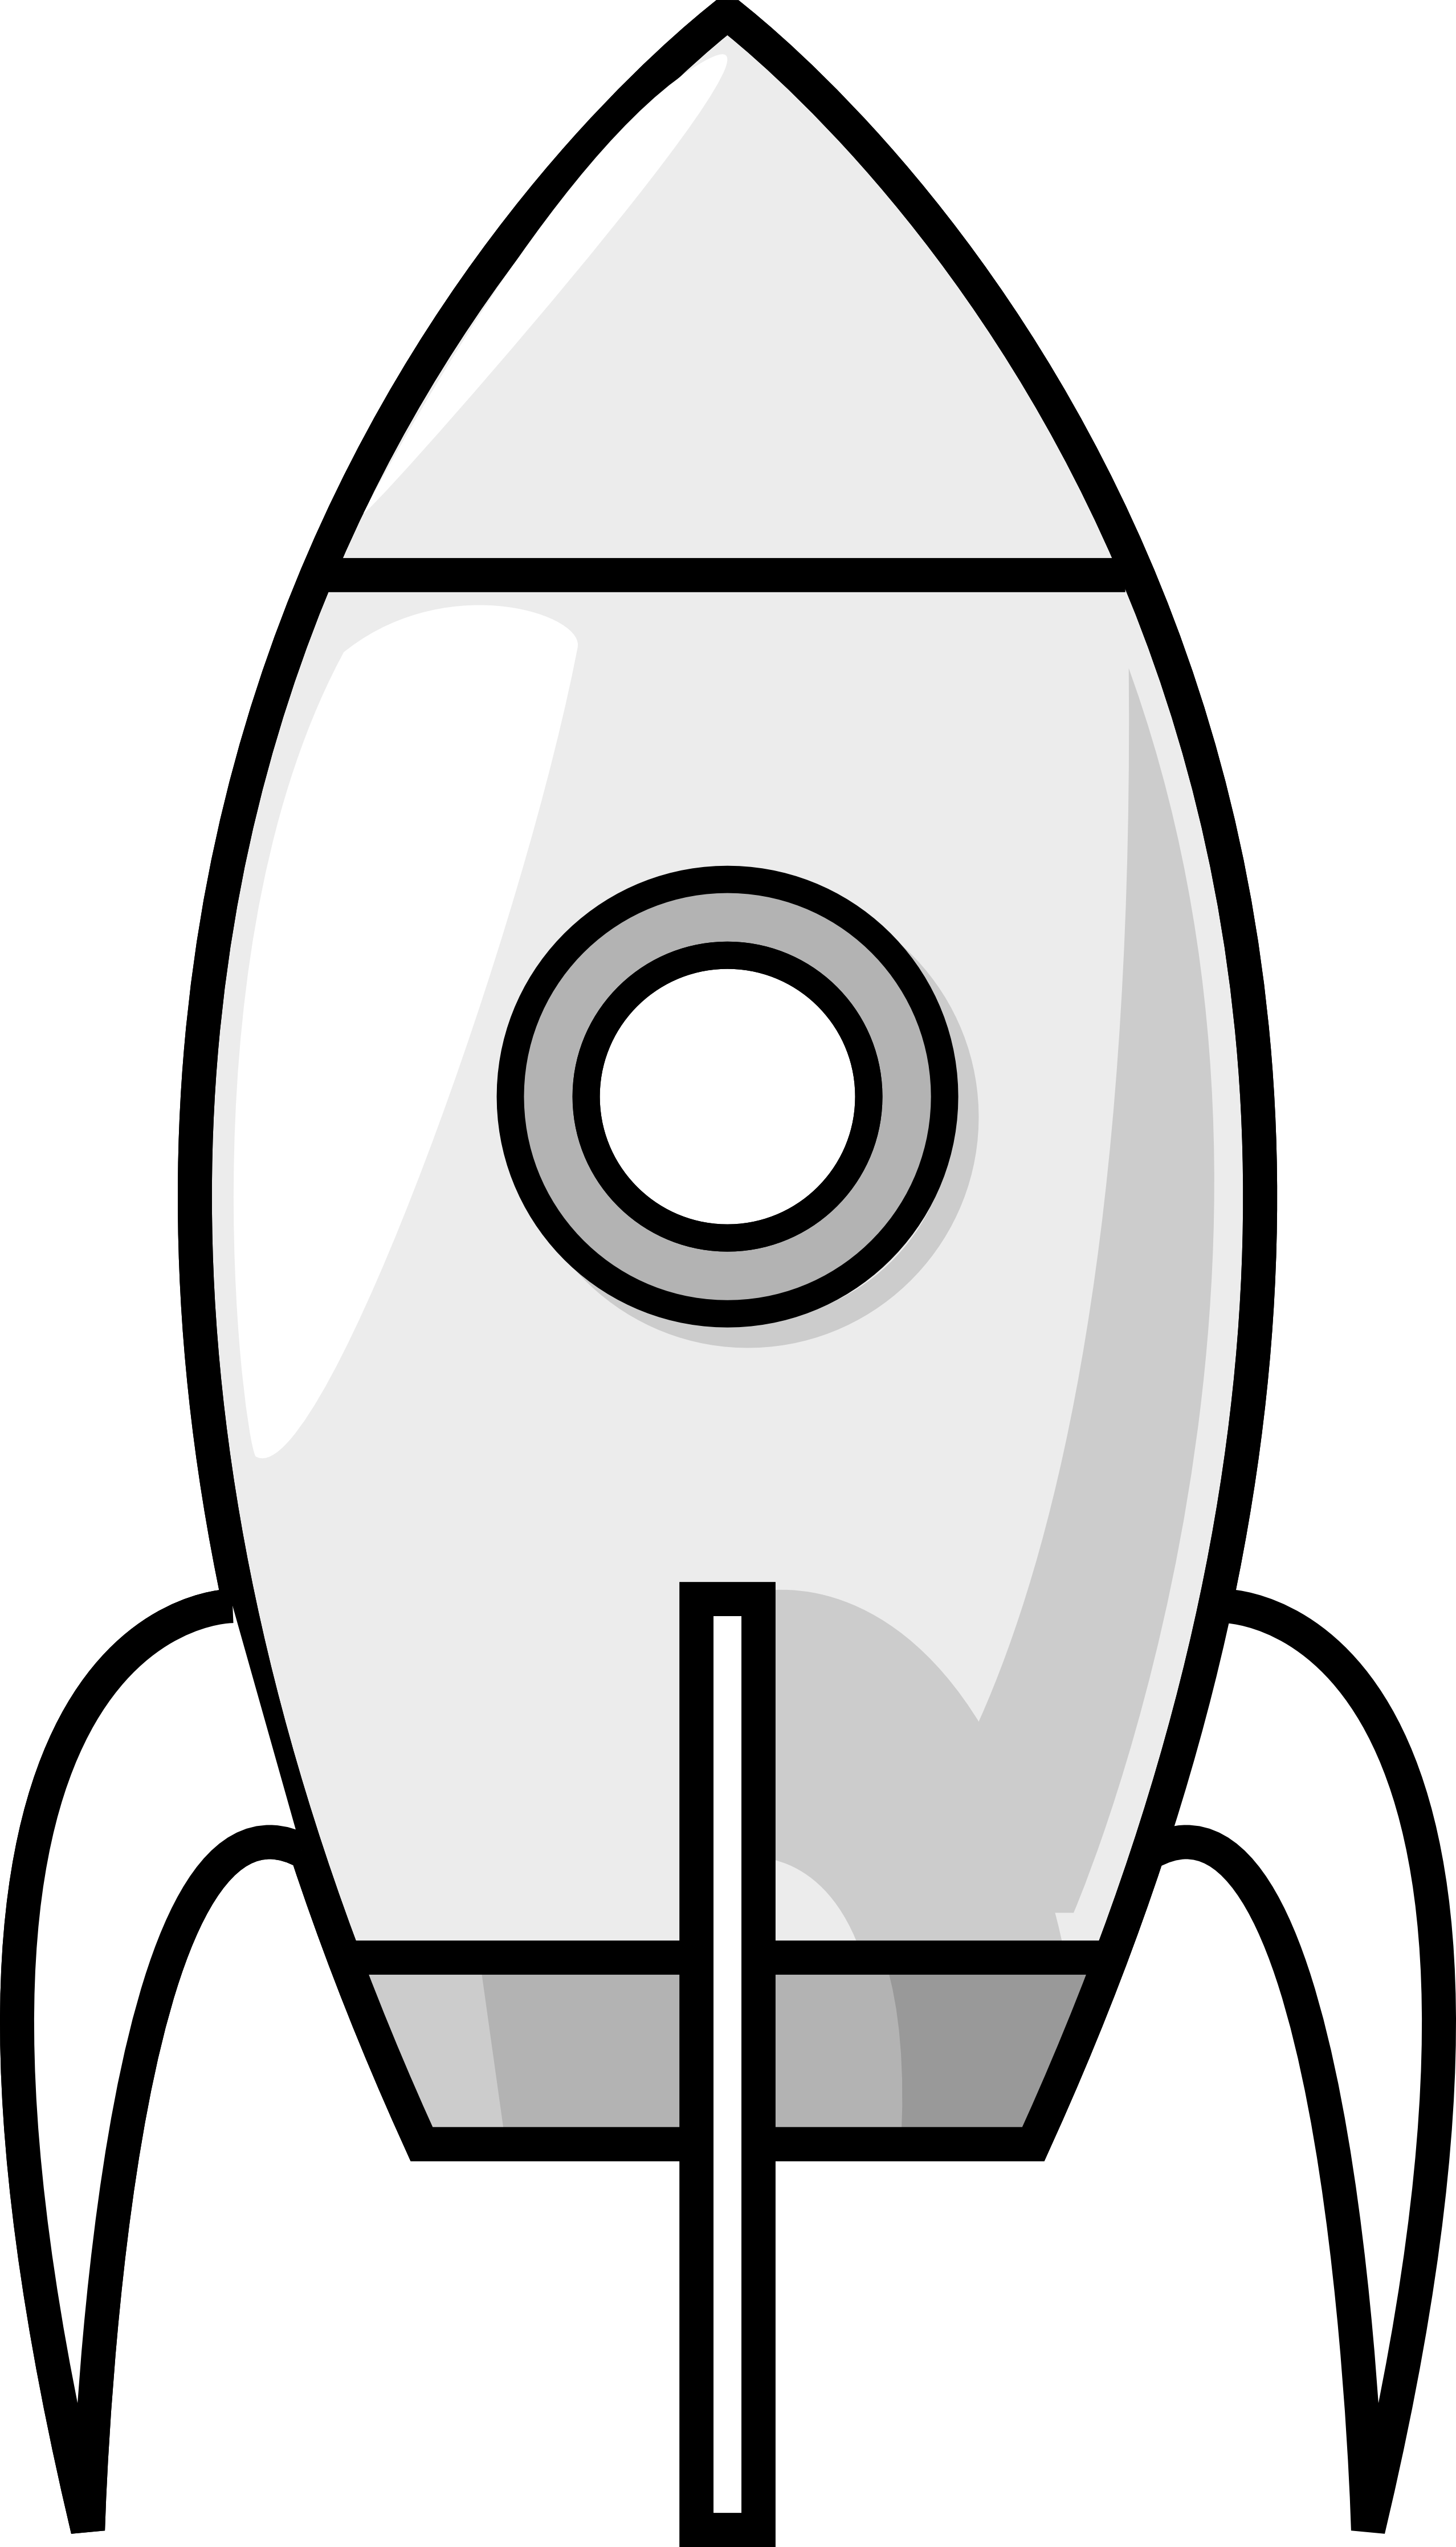 Spaceship clipart move. Rocket black and white